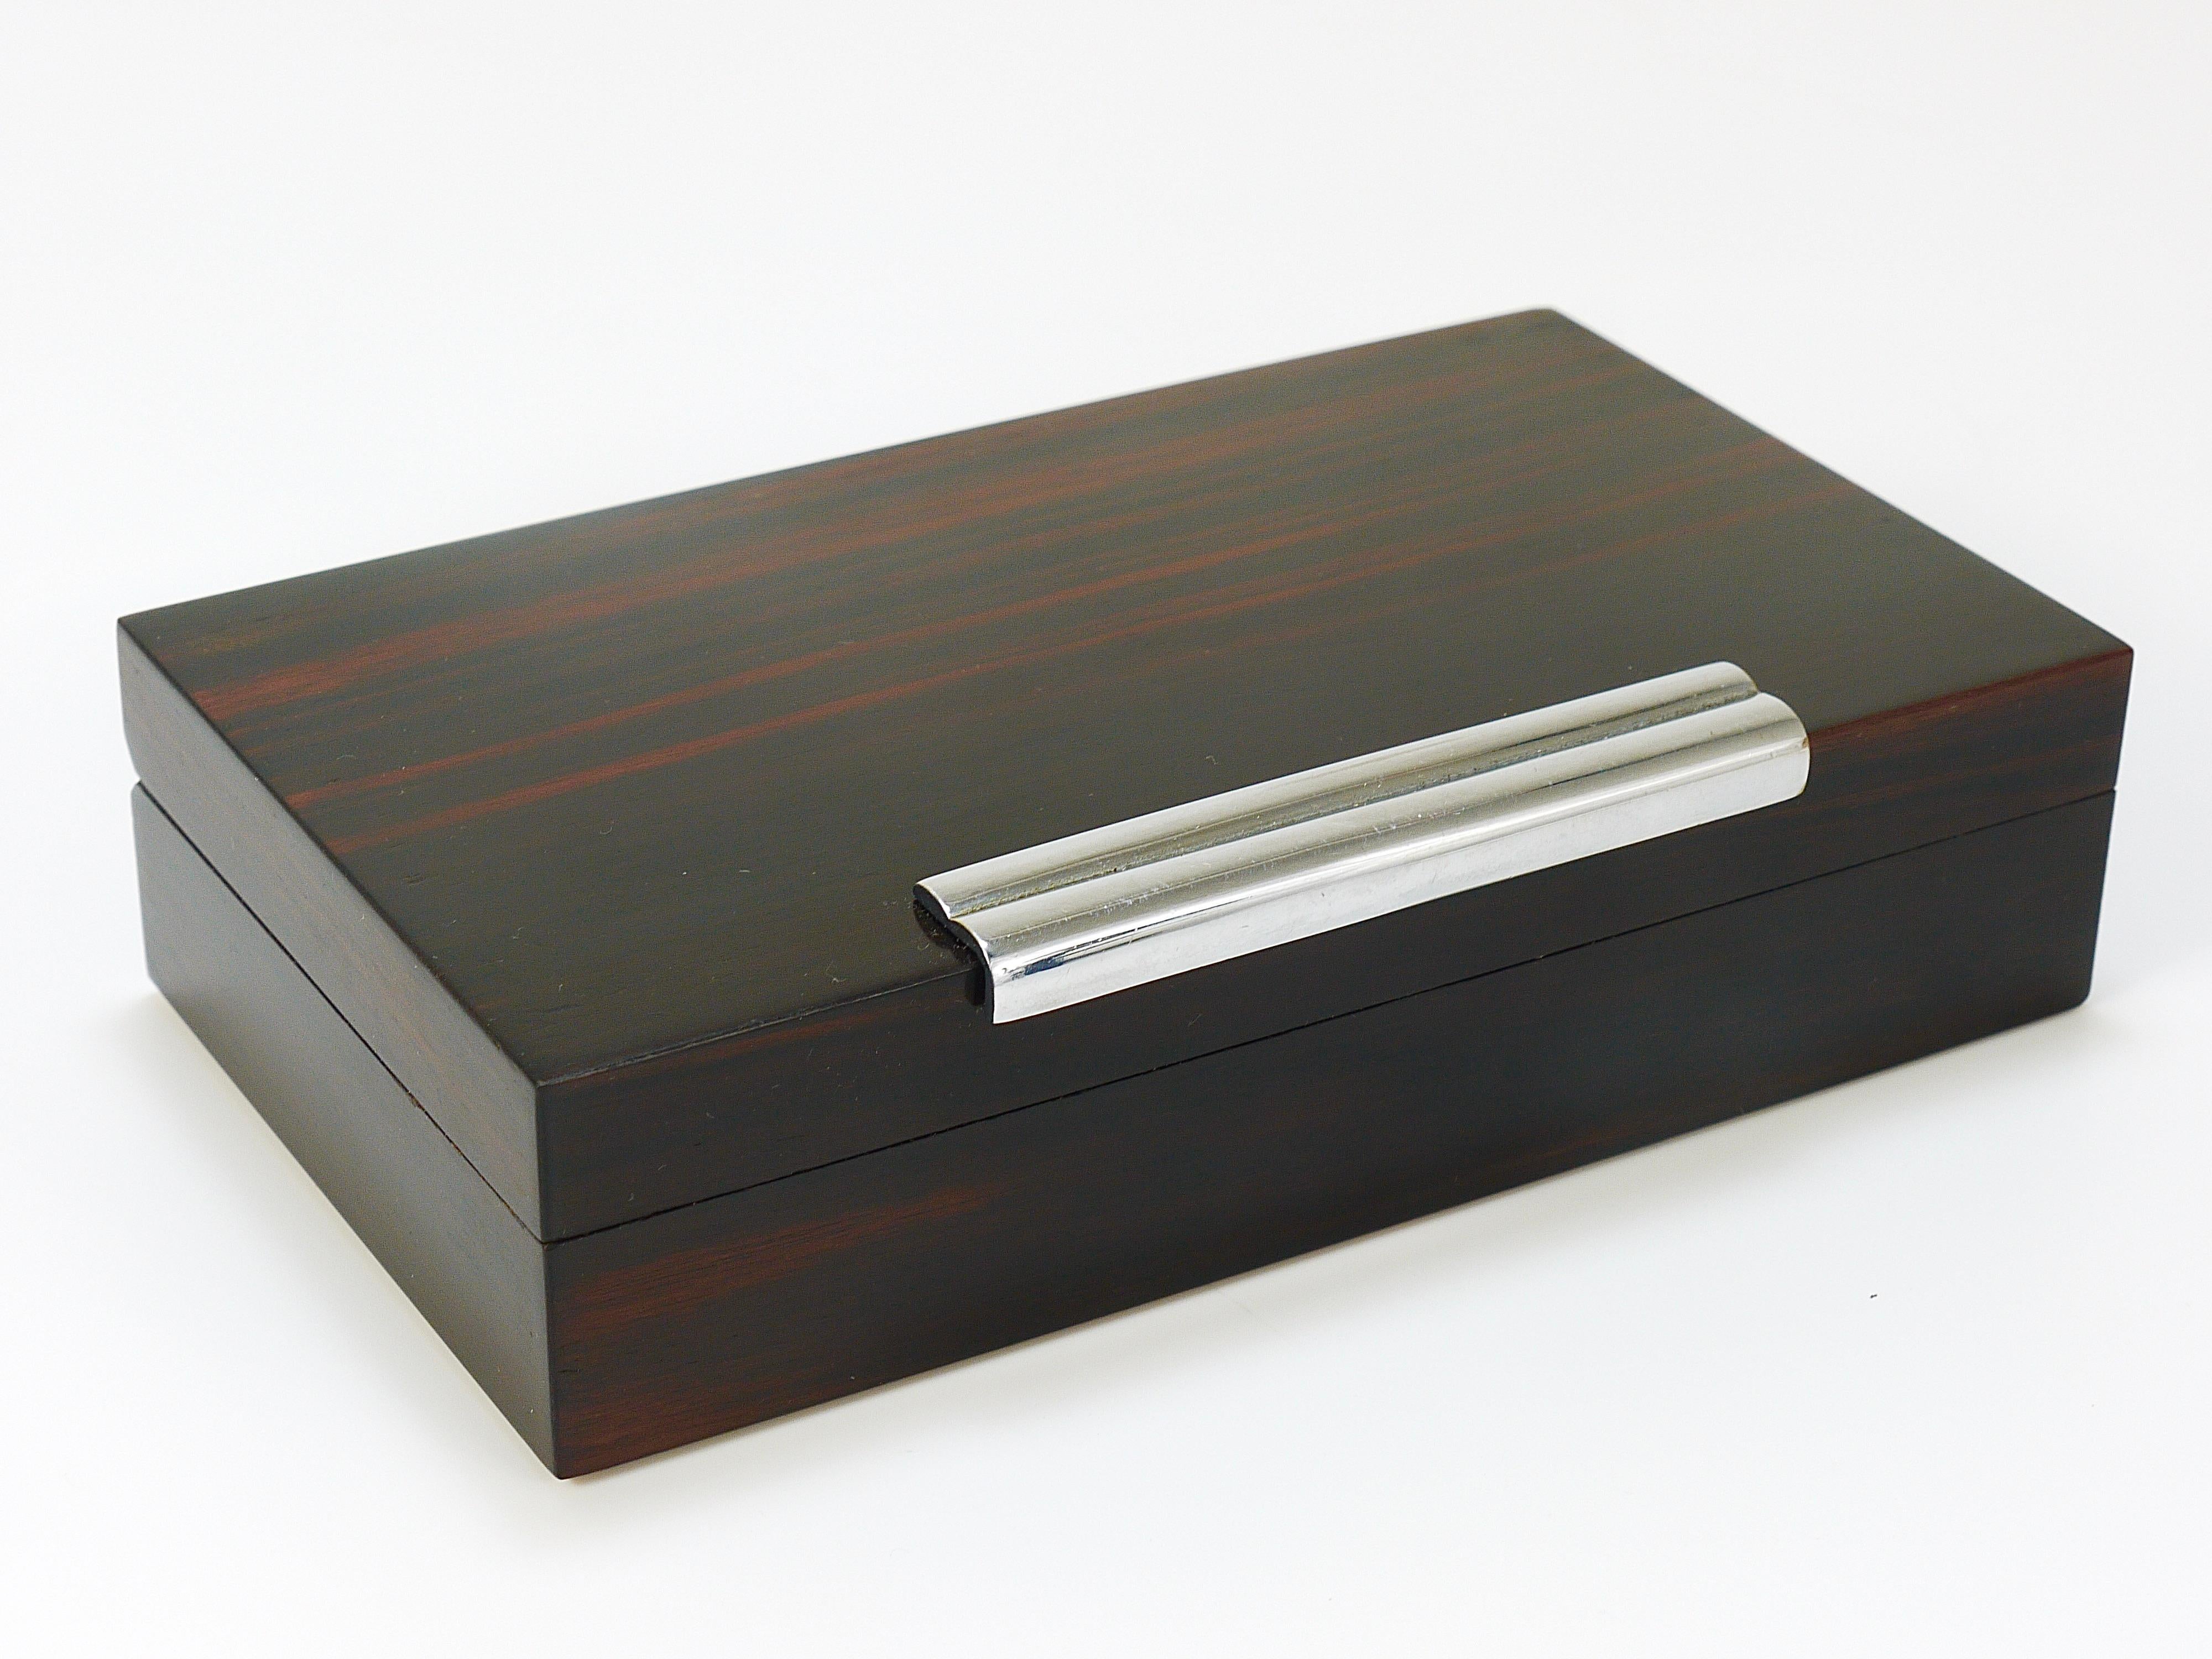 French Art Deco Rosewood & Nickel Storage Box, Maison Desny Style, France, 1930s For Sale 6